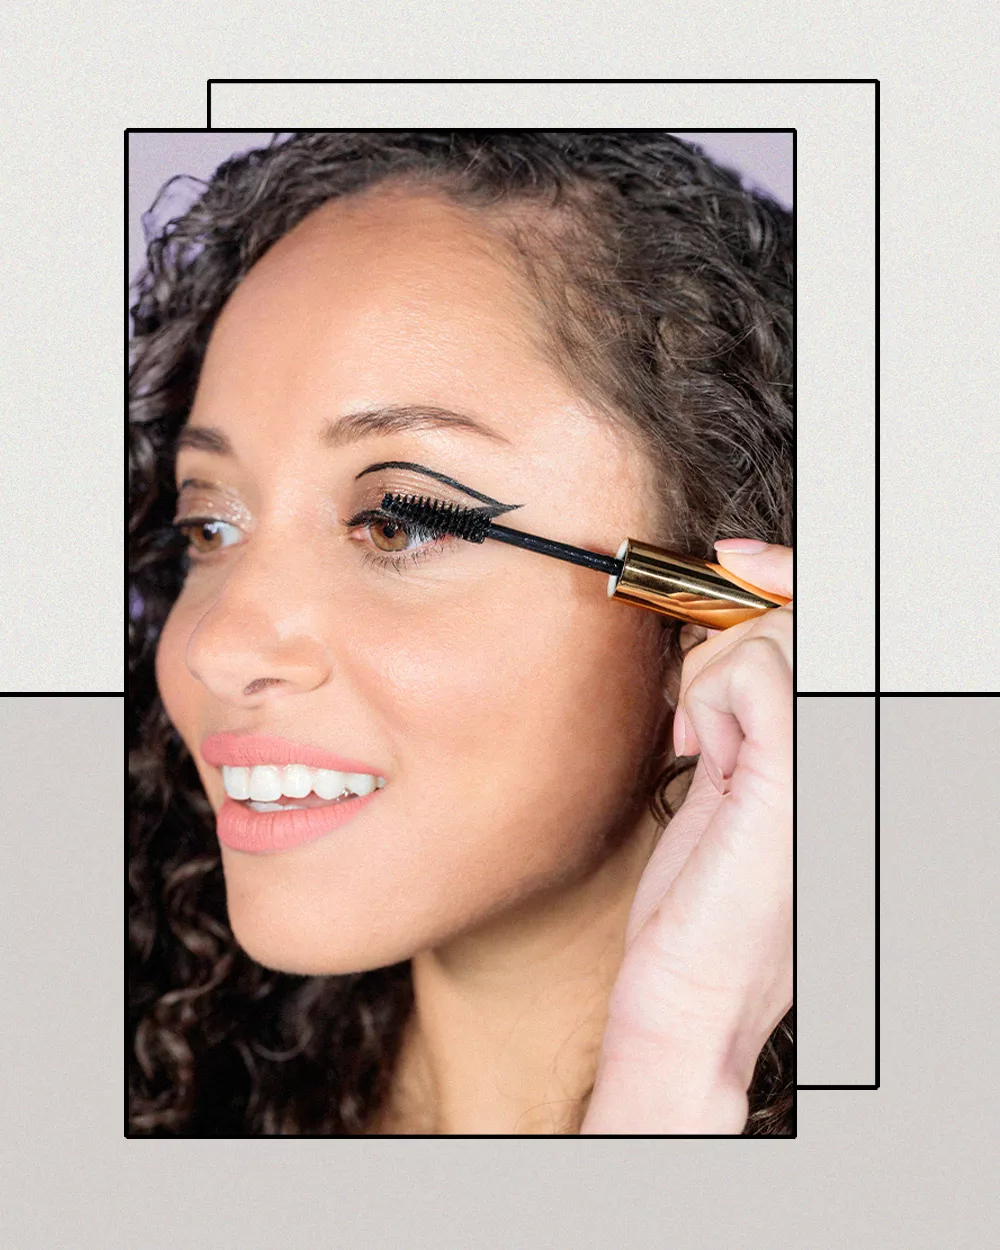 BIPOC Woman Applying Mascara in Addition to her Beige Sparkly Eyeshadow and Graphic Eyeliner